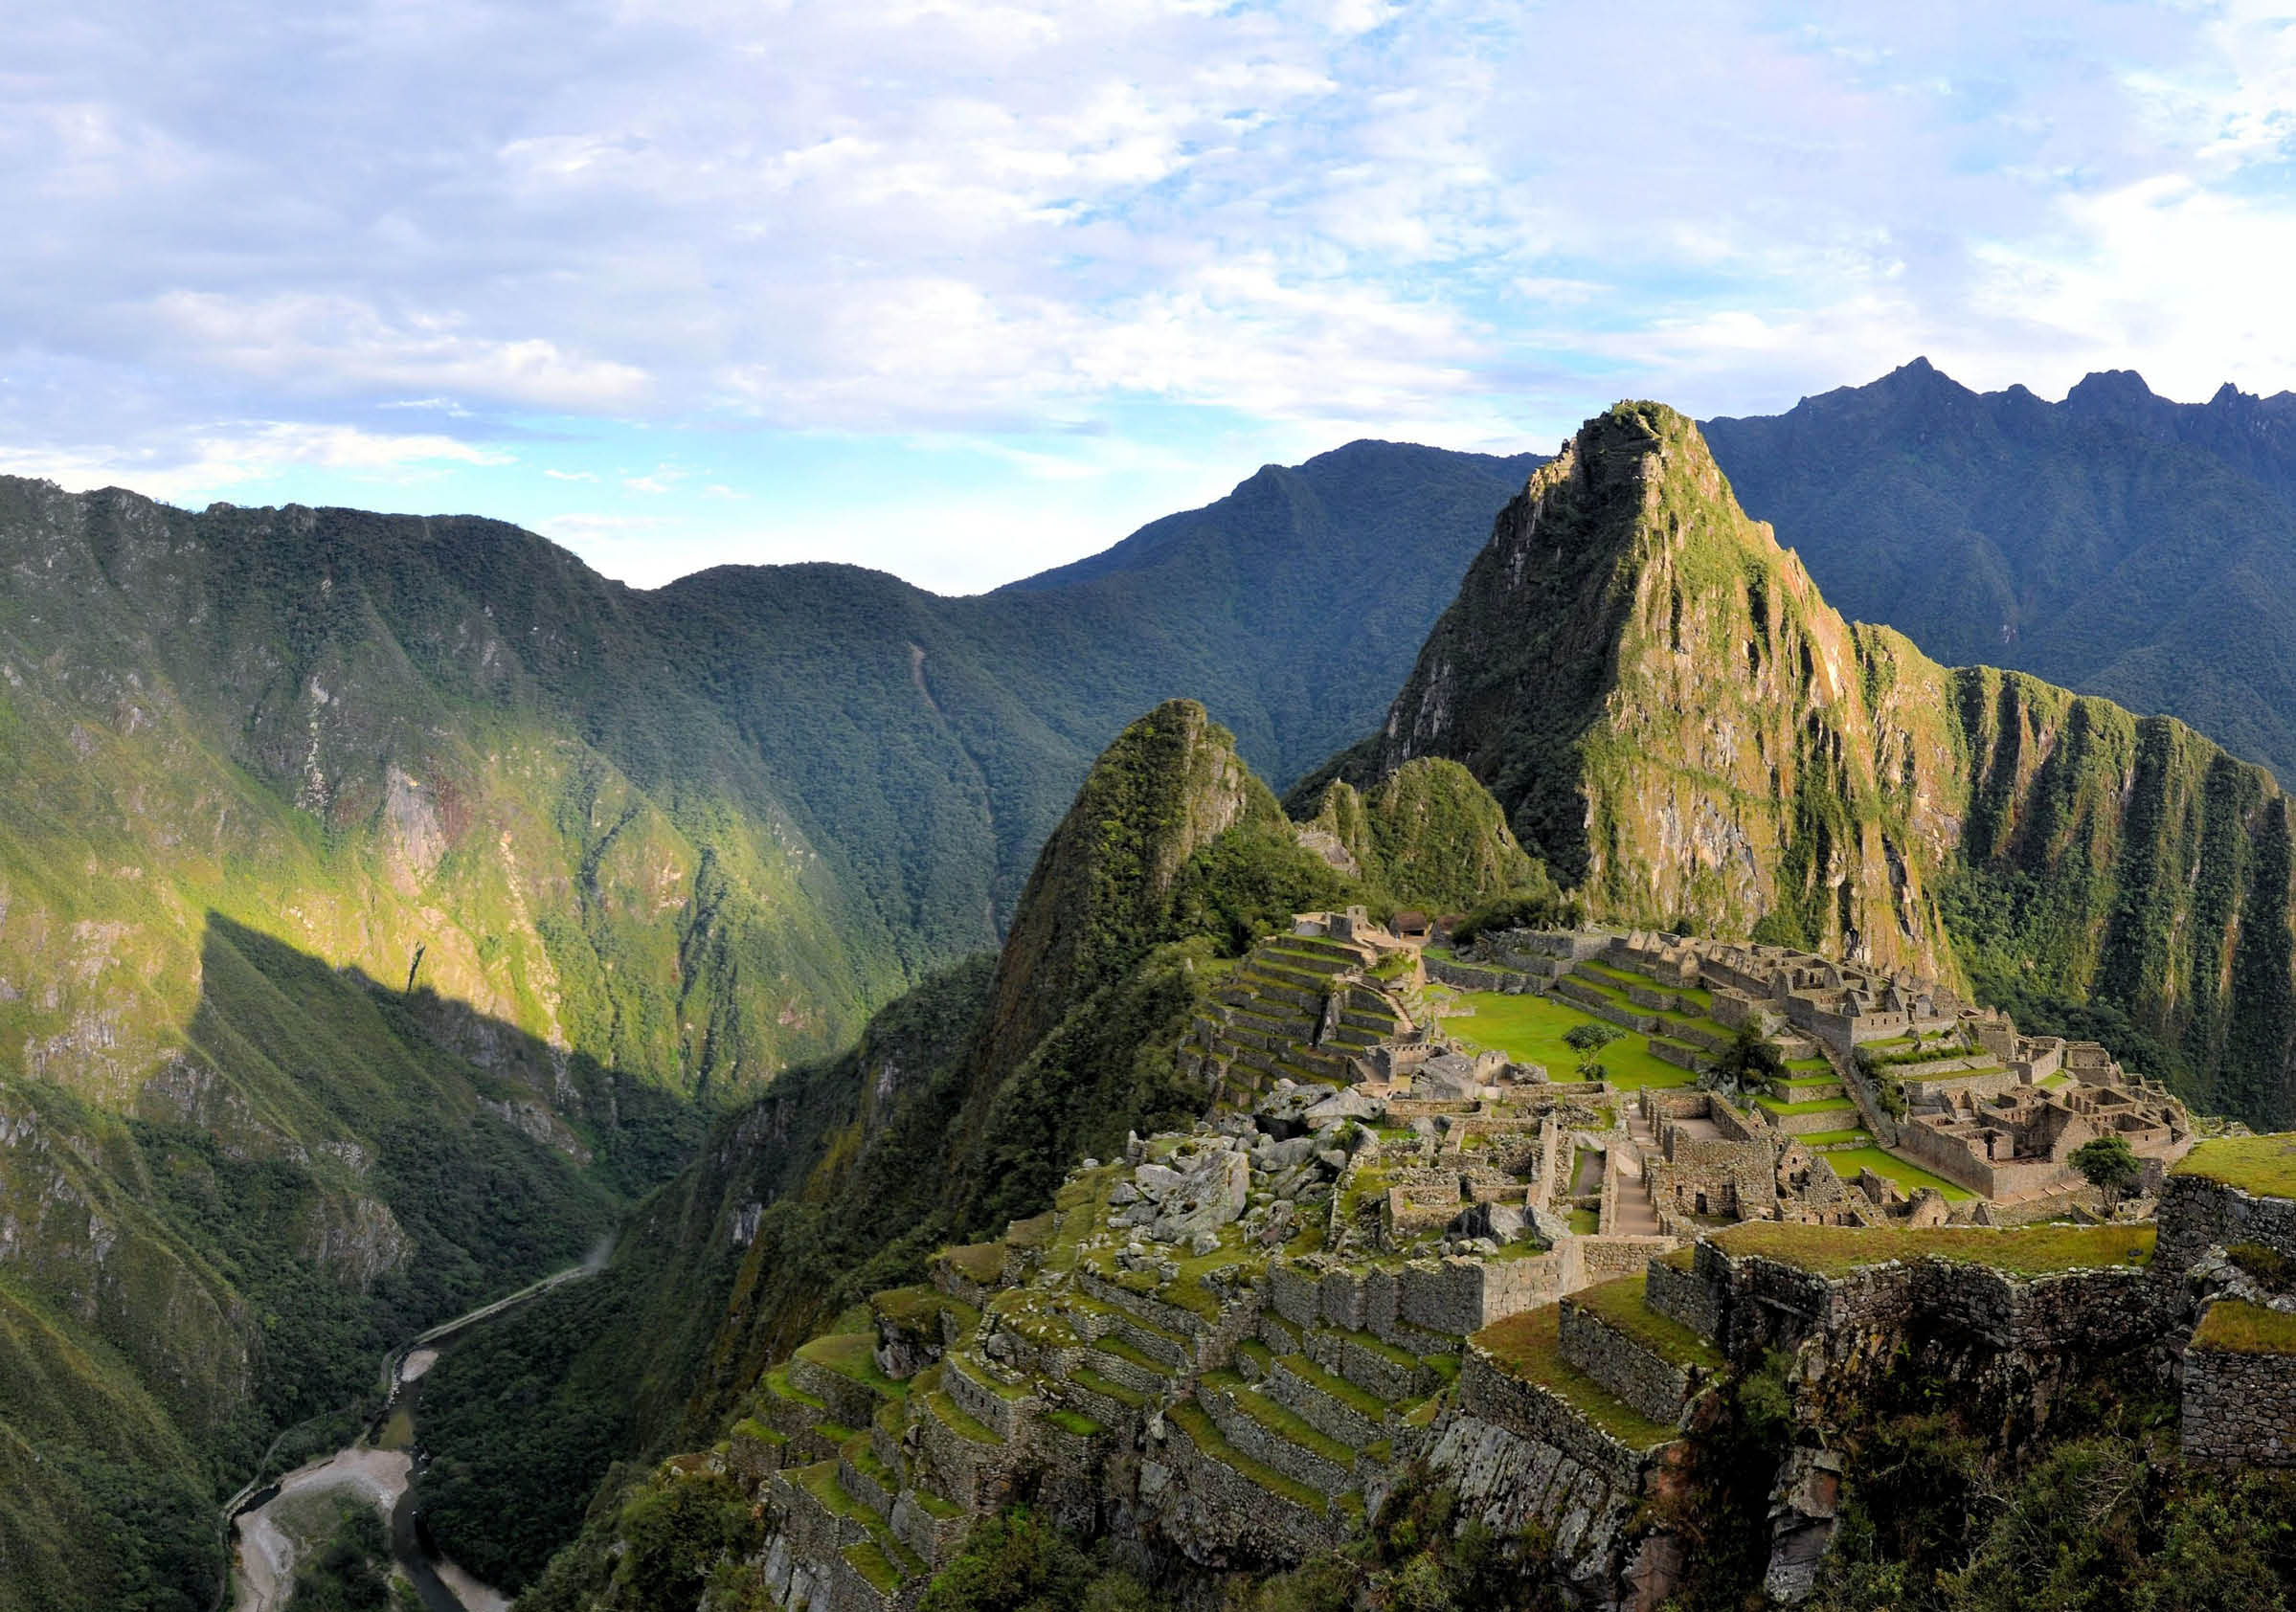 Panorama of Machu Picchu terraces, watcher's hut and Wuayna Picchu with shadow in early morning light  Machu Picchu is the famous lost city of the Incas near the river Urubamba located in the region of the sacred valley of Cuzco  Machu Picchu is a UNESCO world heritage site and one of the 7 new world wonders 